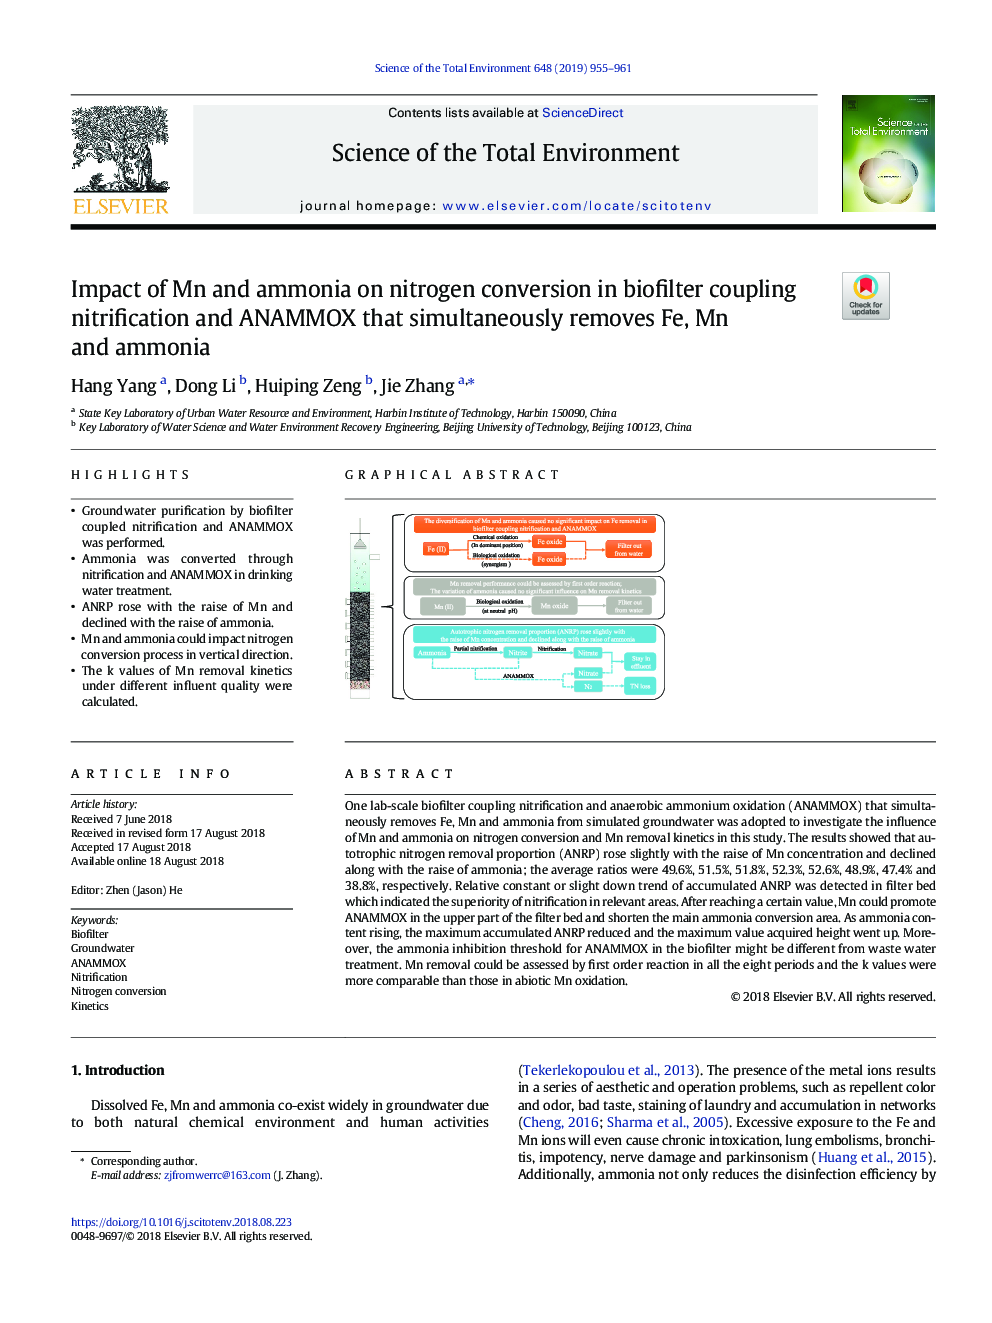 Impact of Mn and ammonia on nitrogen conversion in biofilter coupling nitrification and ANAMMOX that simultaneously removes Fe, Mn and ammonia